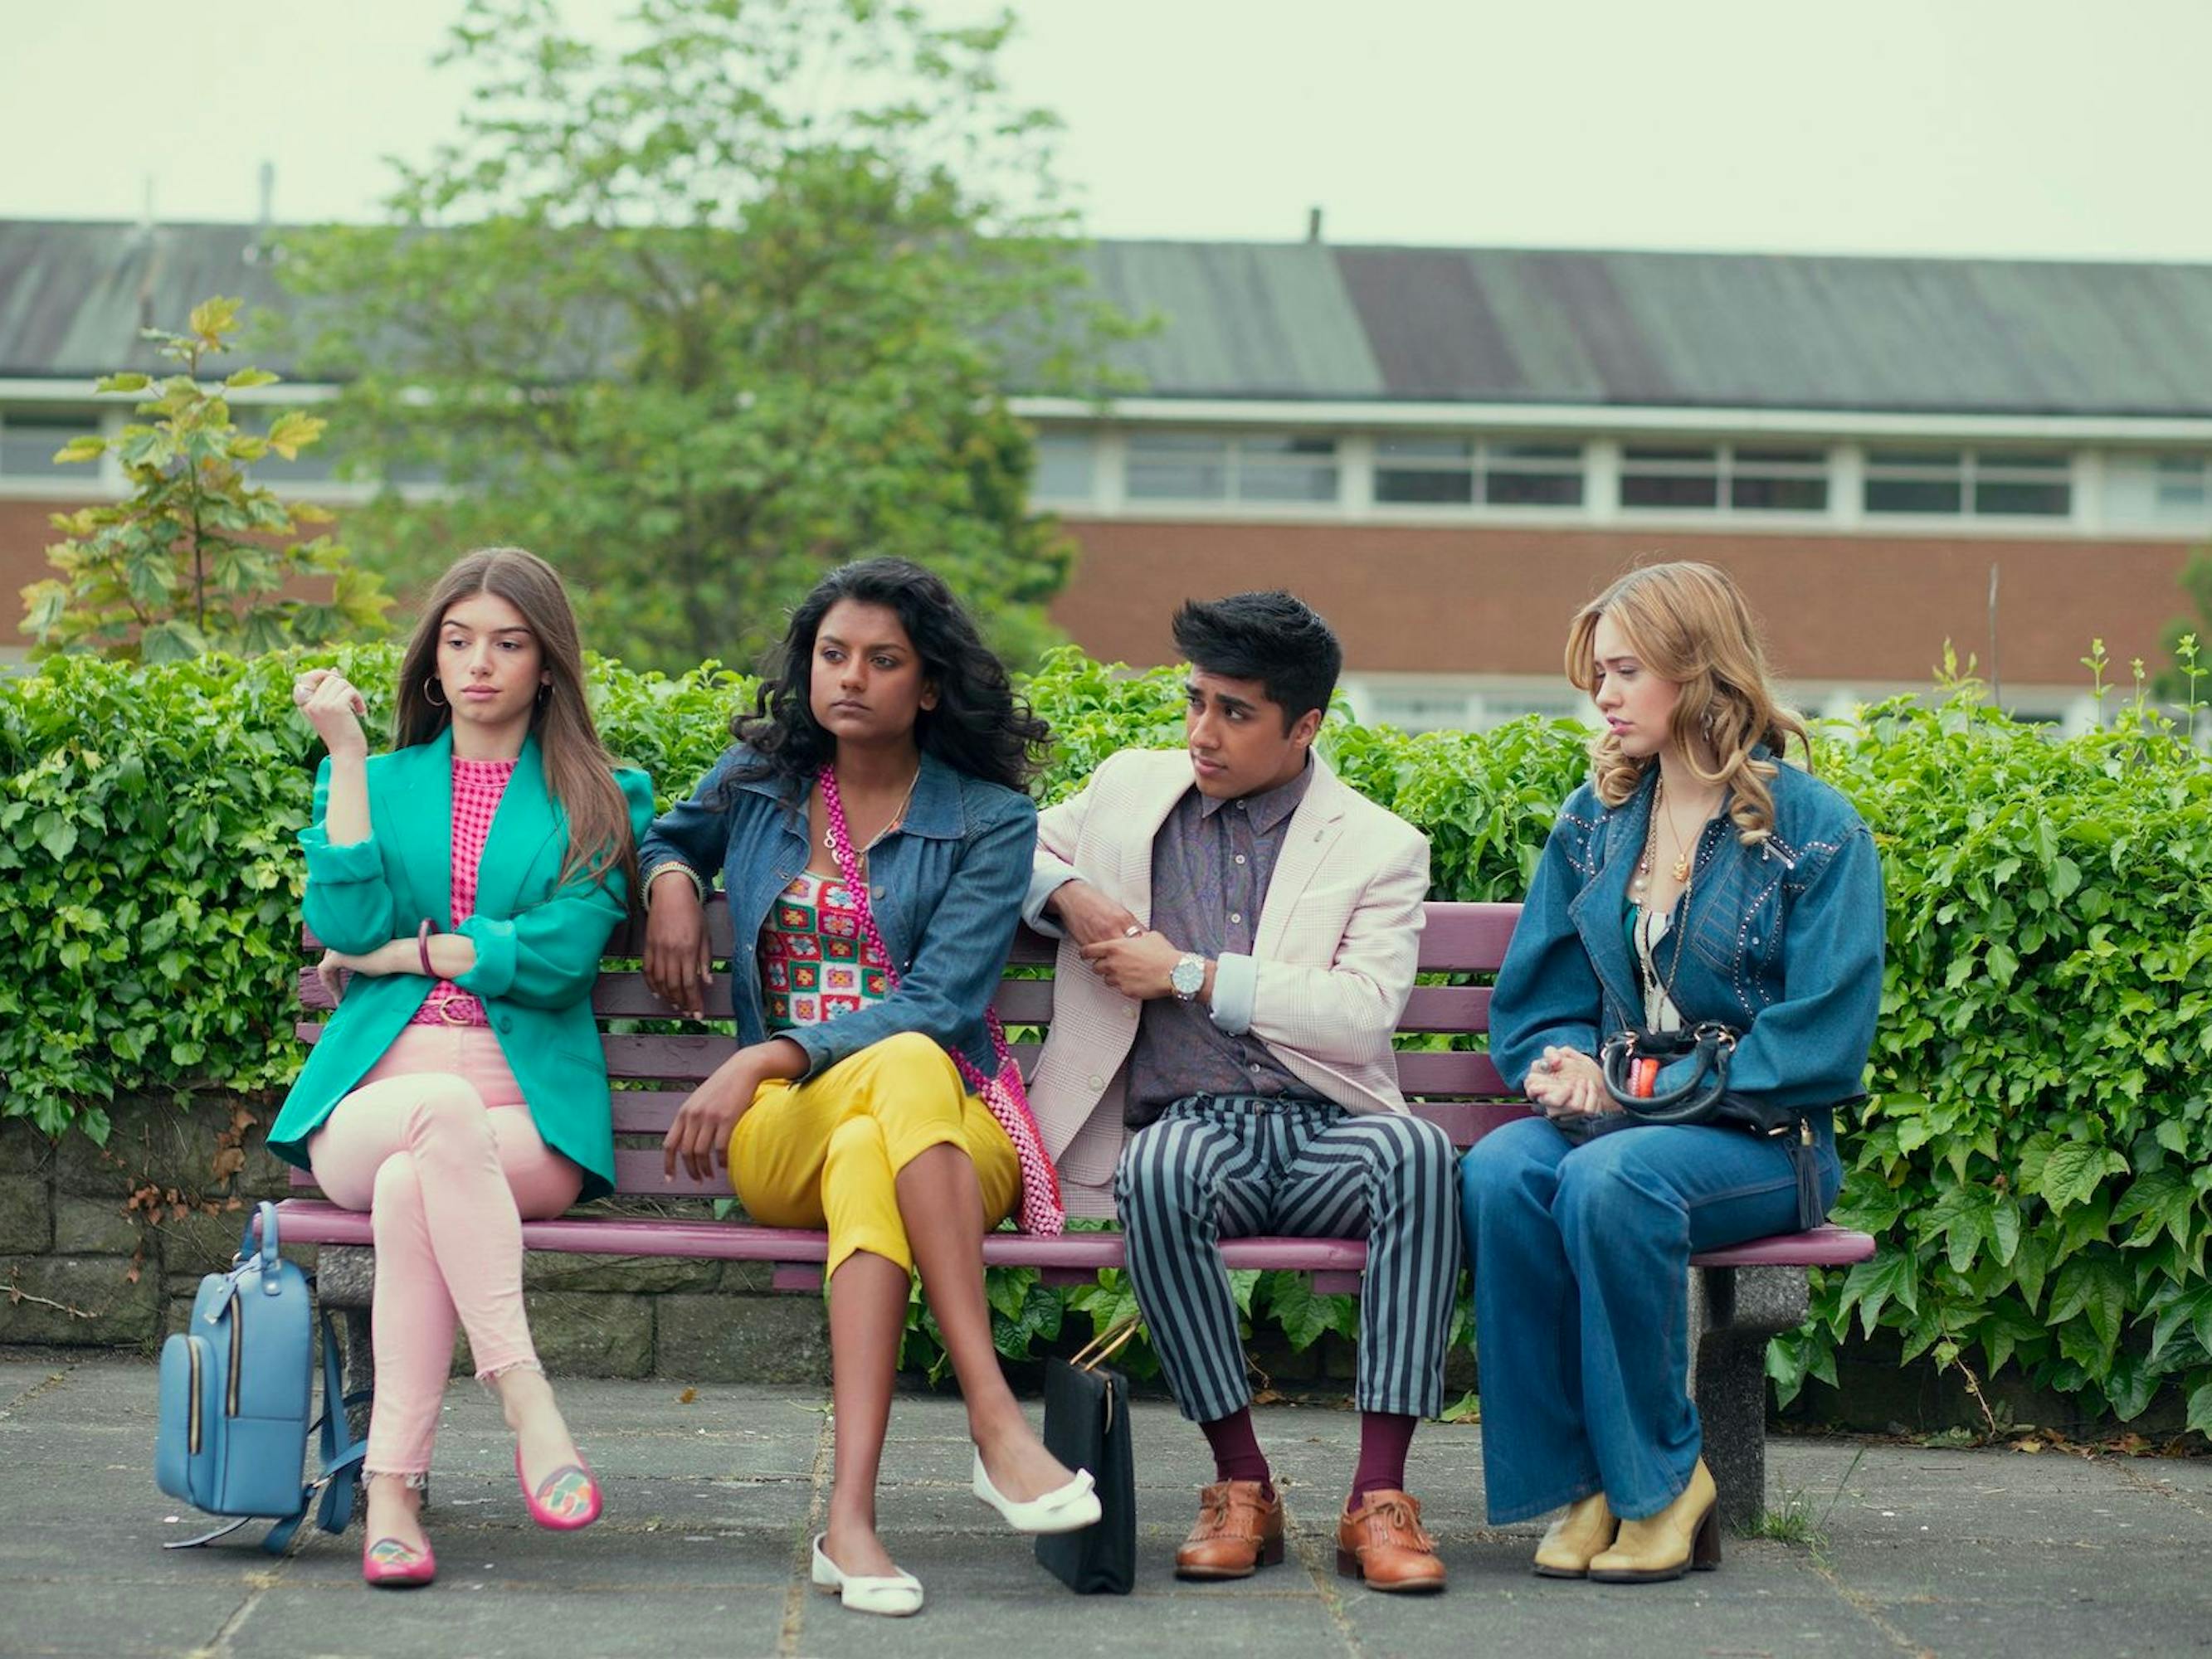 Ruby Matthews (Mimi Keene), Olivia Hanan (Simone Ashley), Anwar (Chaneil Kular), and Aimee Gibbs (Aimme Lou Wood) sit on a red bench together looking fabulous. Behind the bench is a row of green hedges and in the backdrop is Moordale Secondary School.